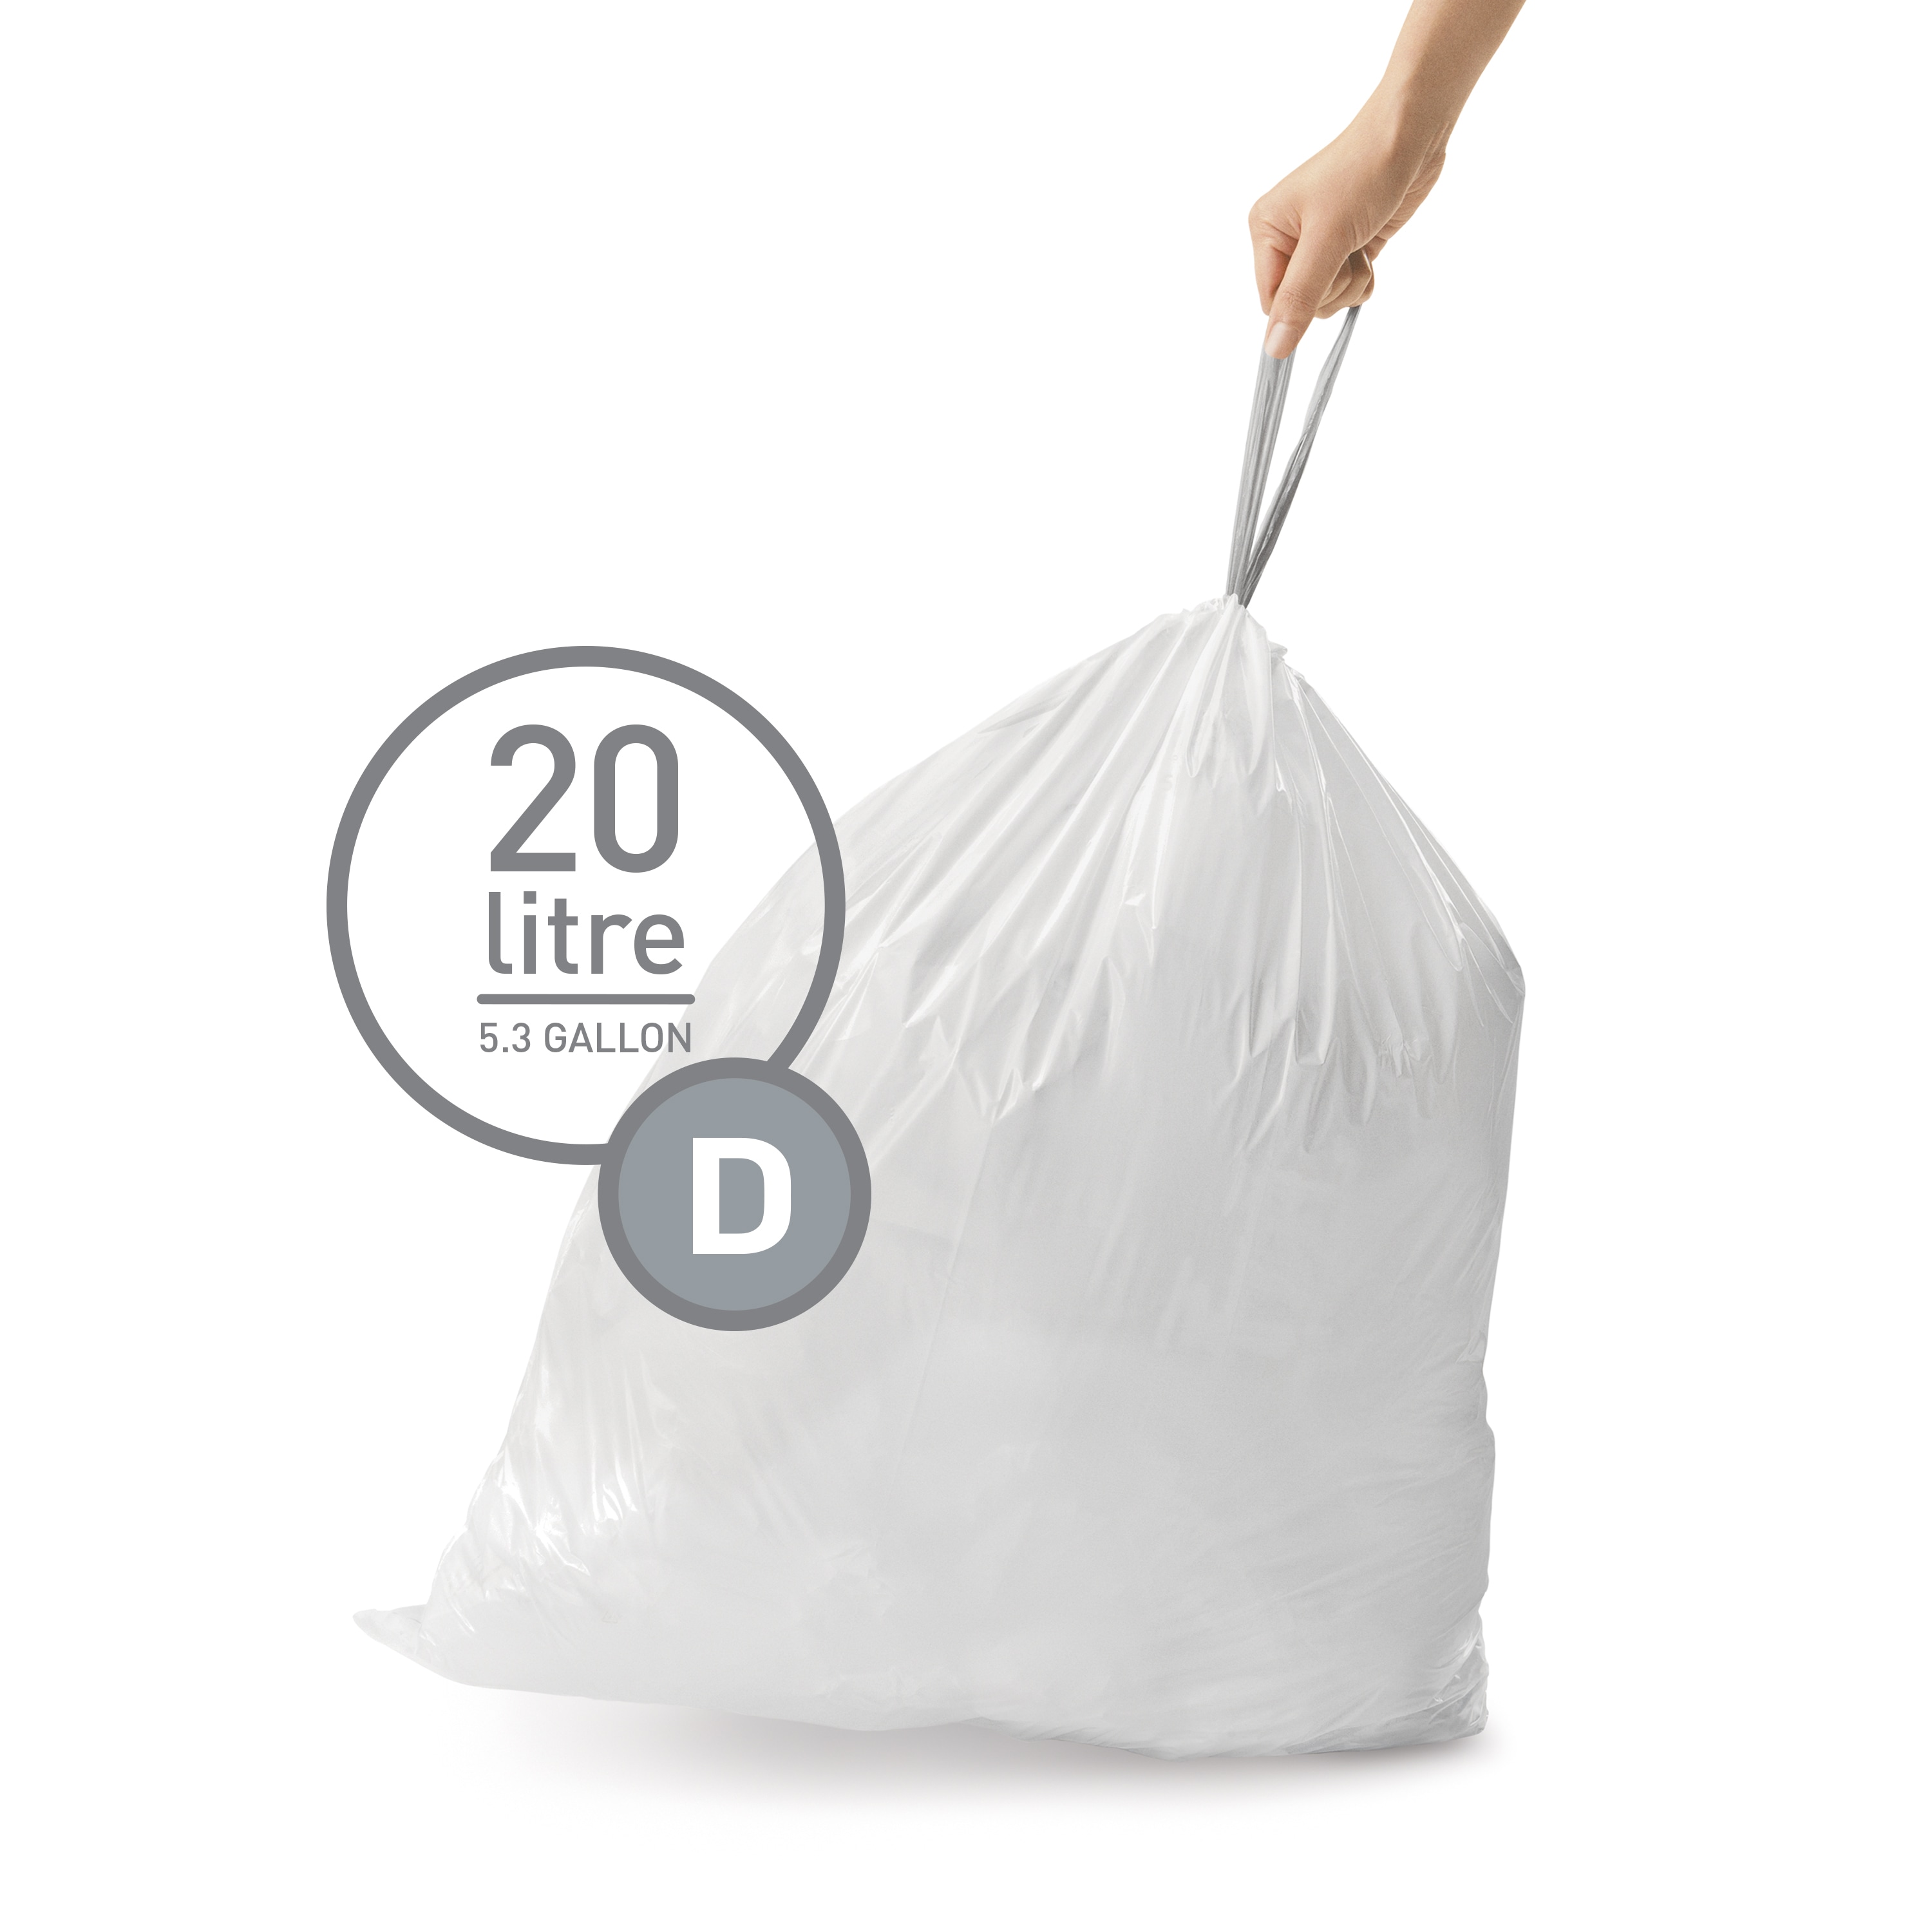  Small Trash Bags 3-5 Gallon, Inwaysin 200 Count Small Bathroom Trash  Bags Black, Strong Small For Garbage, 4 Gallon Biodegradable, Unscented,  Size Expanded for Kitchen : Health & Household